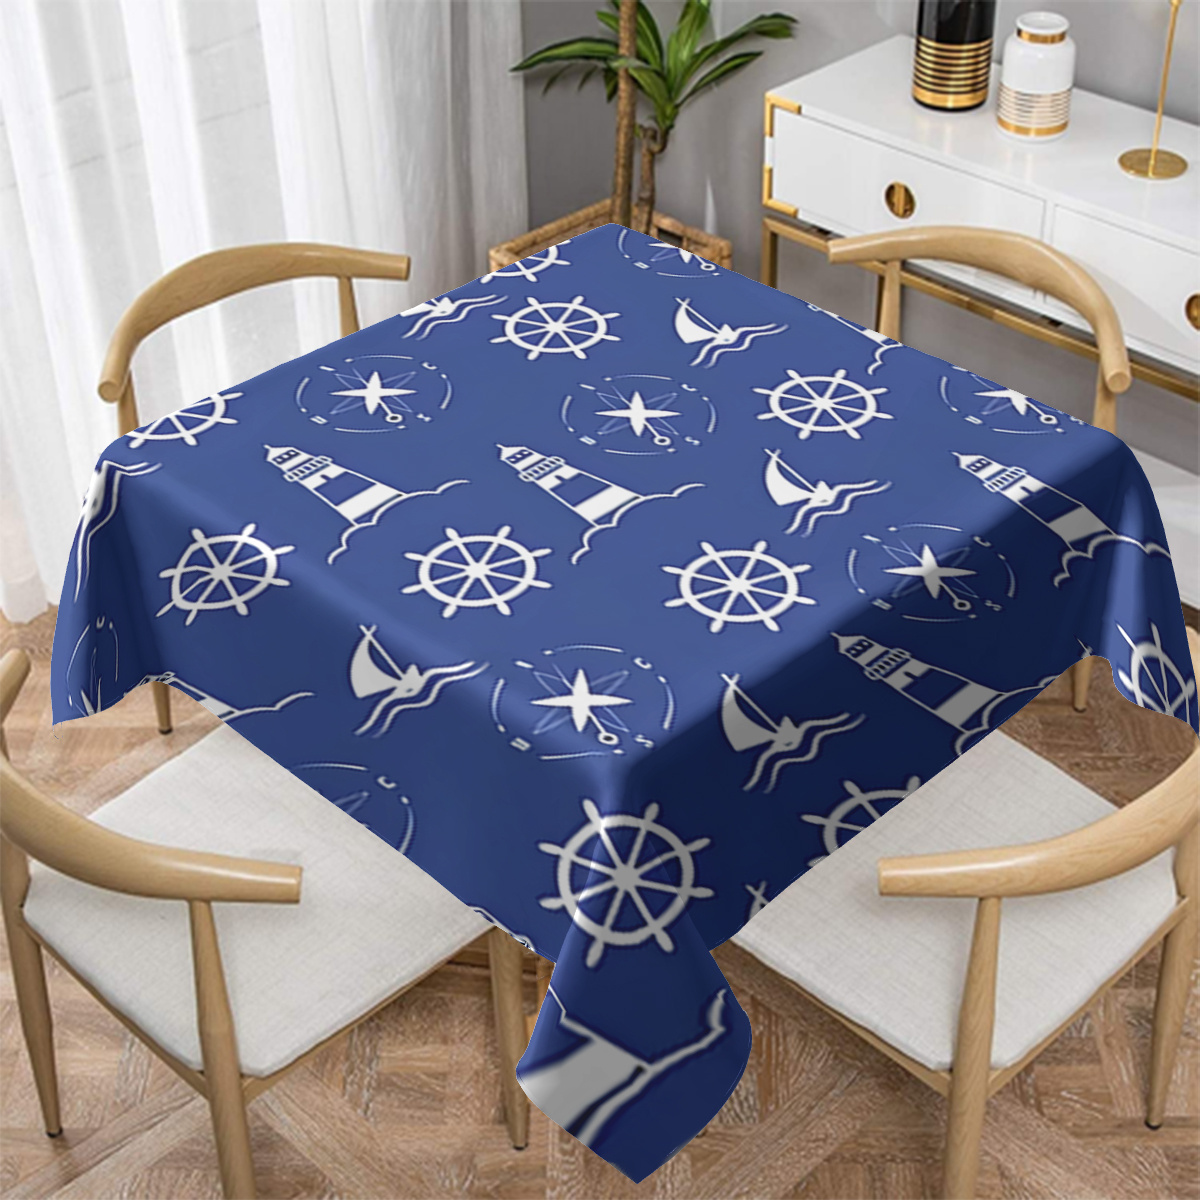 

Marine Nautical Polyester Tablecloth - Machine Made Anchor And Lighthouse Print, Versatile Indoor/outdoor Use For Parties, Picnics, Kitchen Decor, Holiday Gifts - 1pc